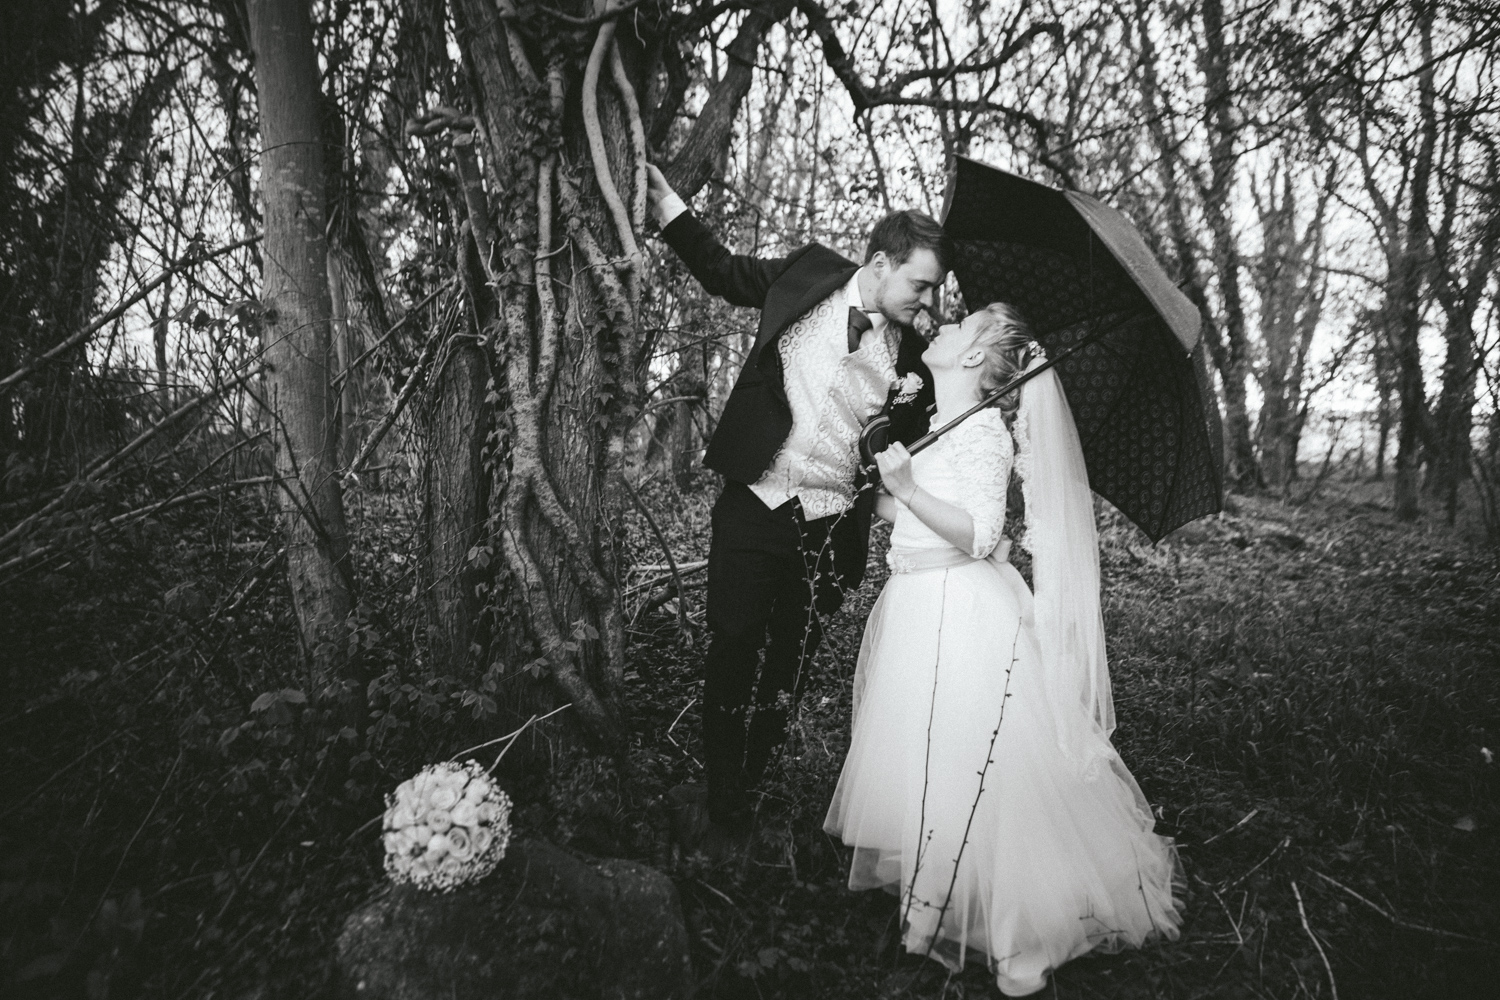 Marriage under an umbrella in nature on Bornholm